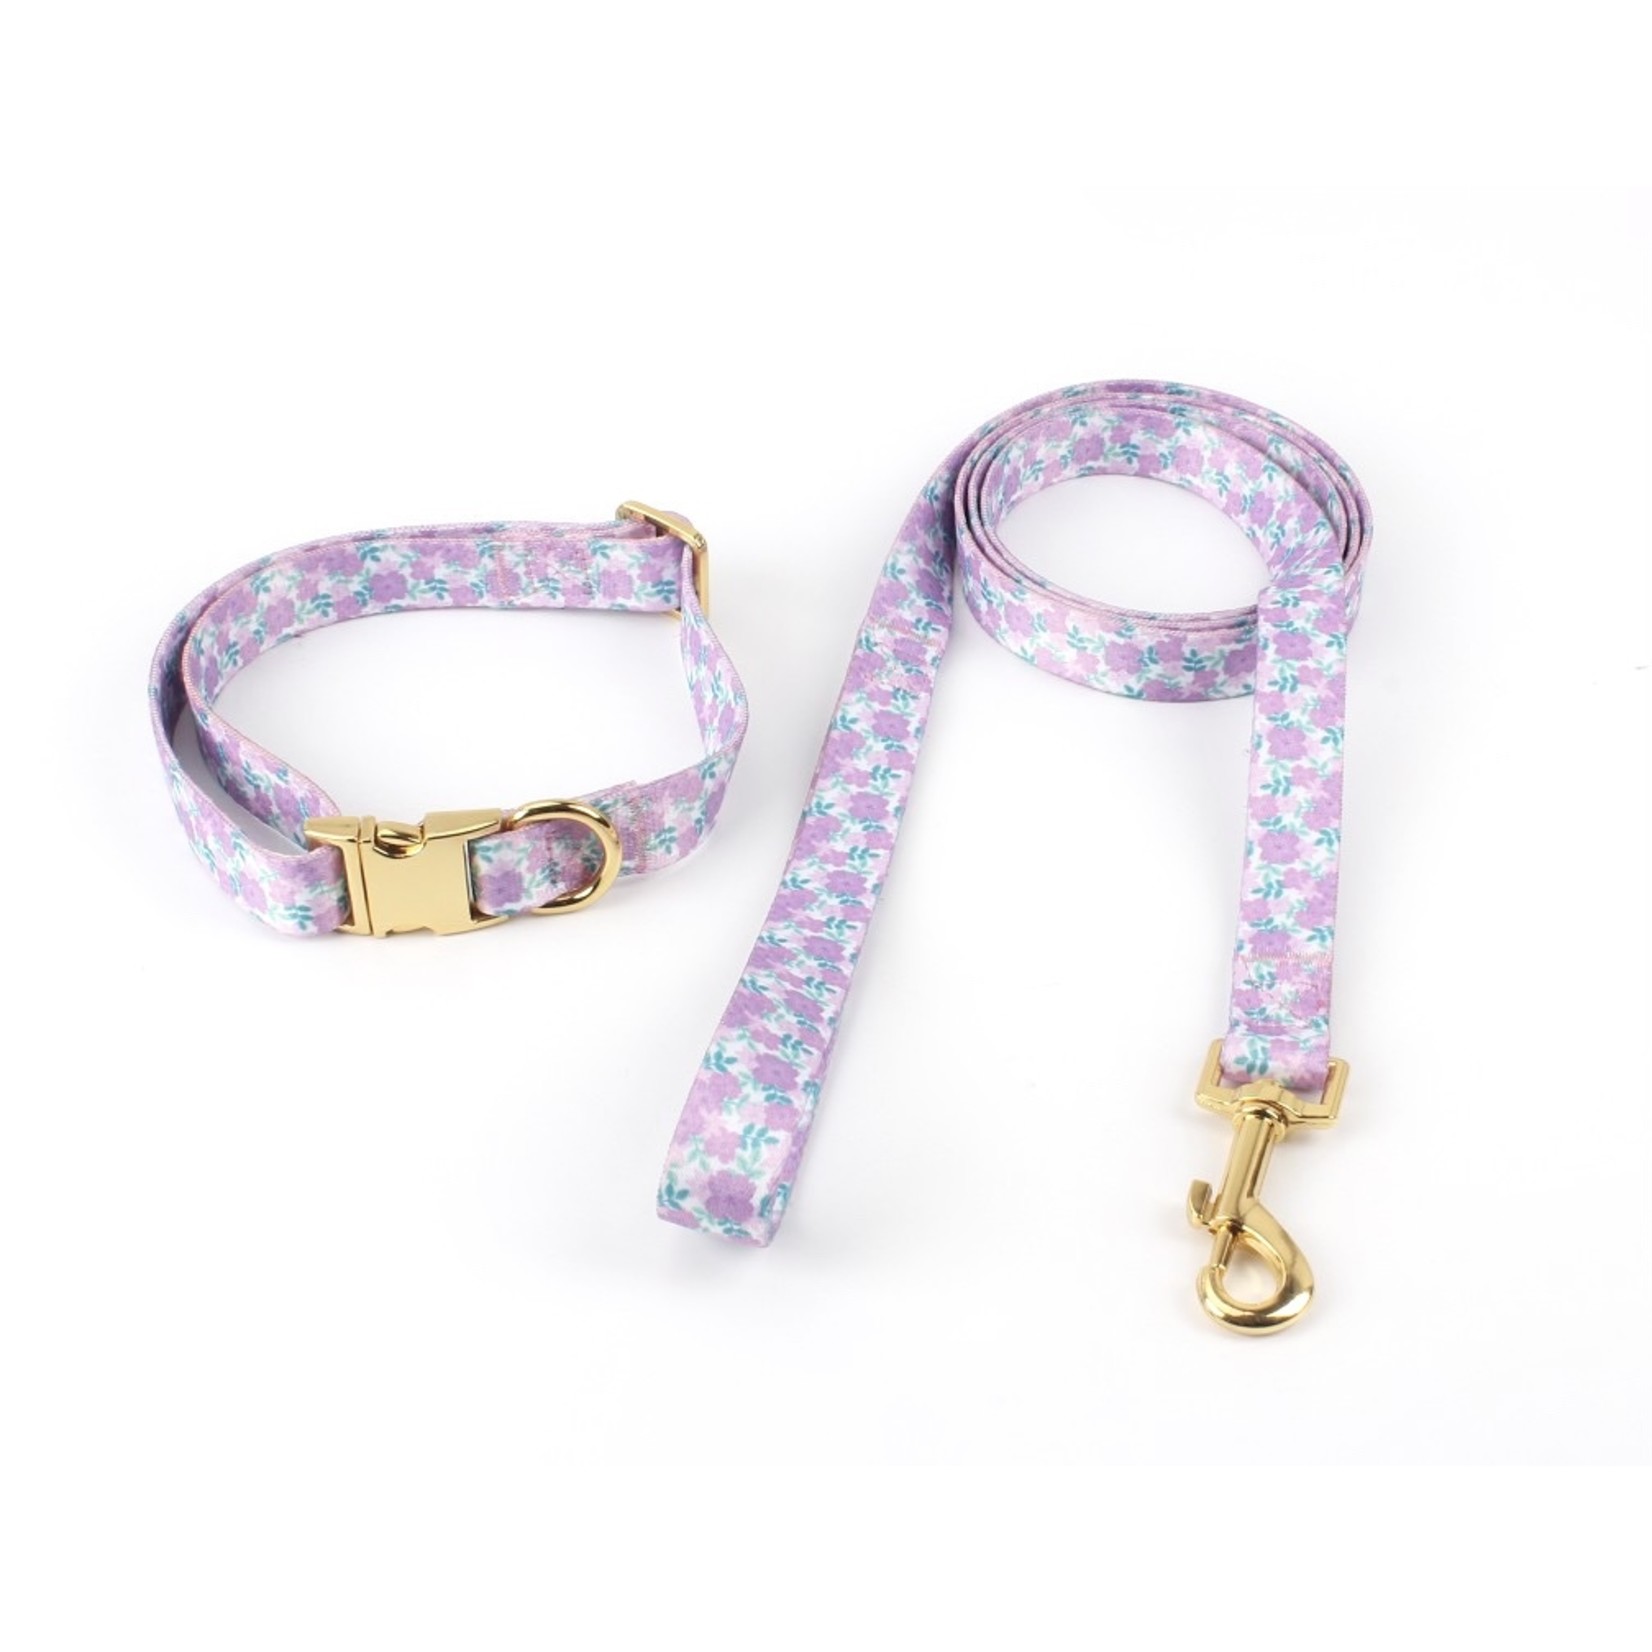 Doggy Glam Boutique Doggy Glam Boutique Floral Gold Dog Collar